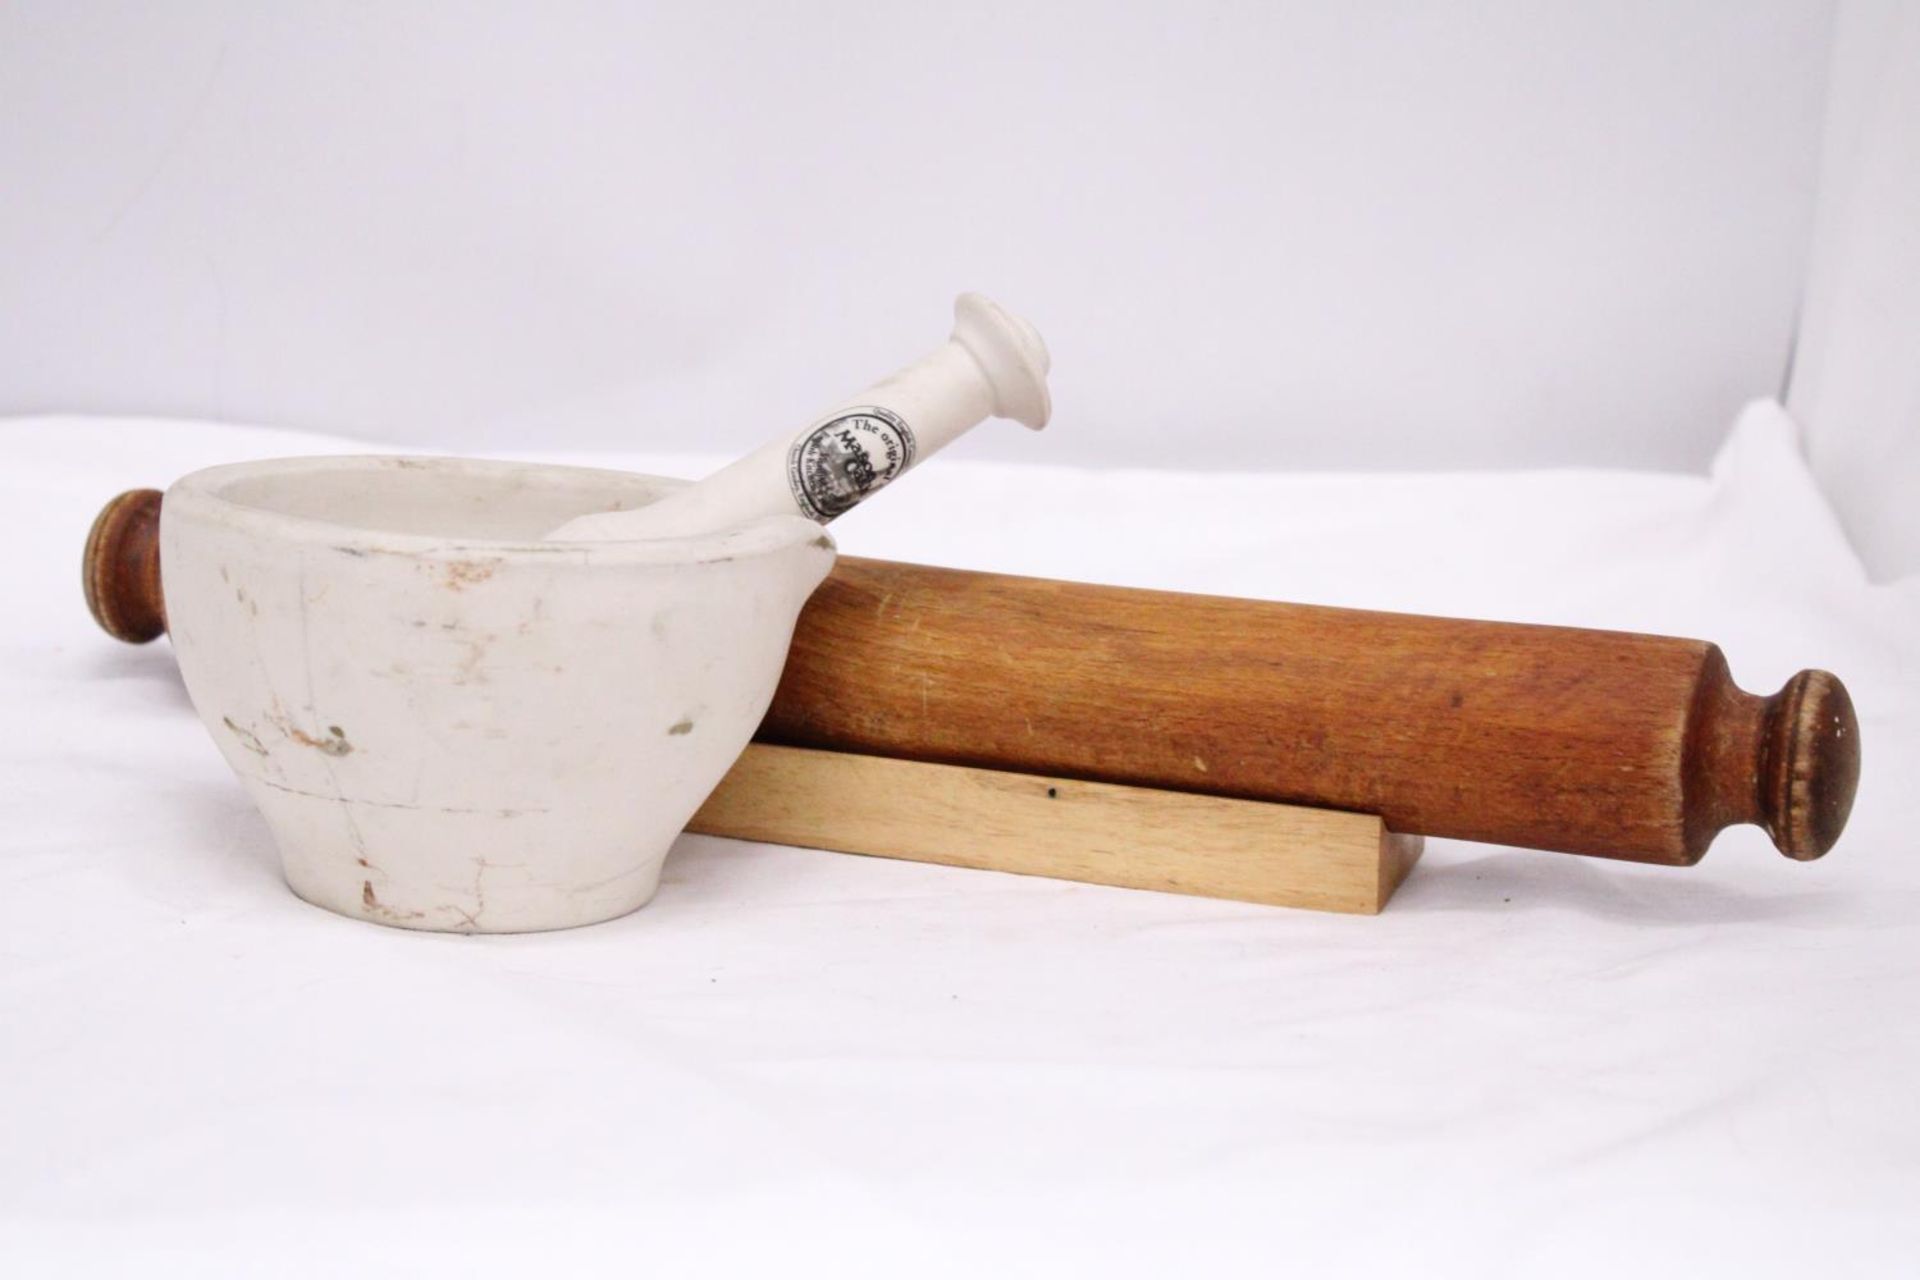 A MASON CASH CERAMIC PESTLE AND MORTAR AND A 'GOURMET' ROLLING PIN AND STAND - Image 4 of 4